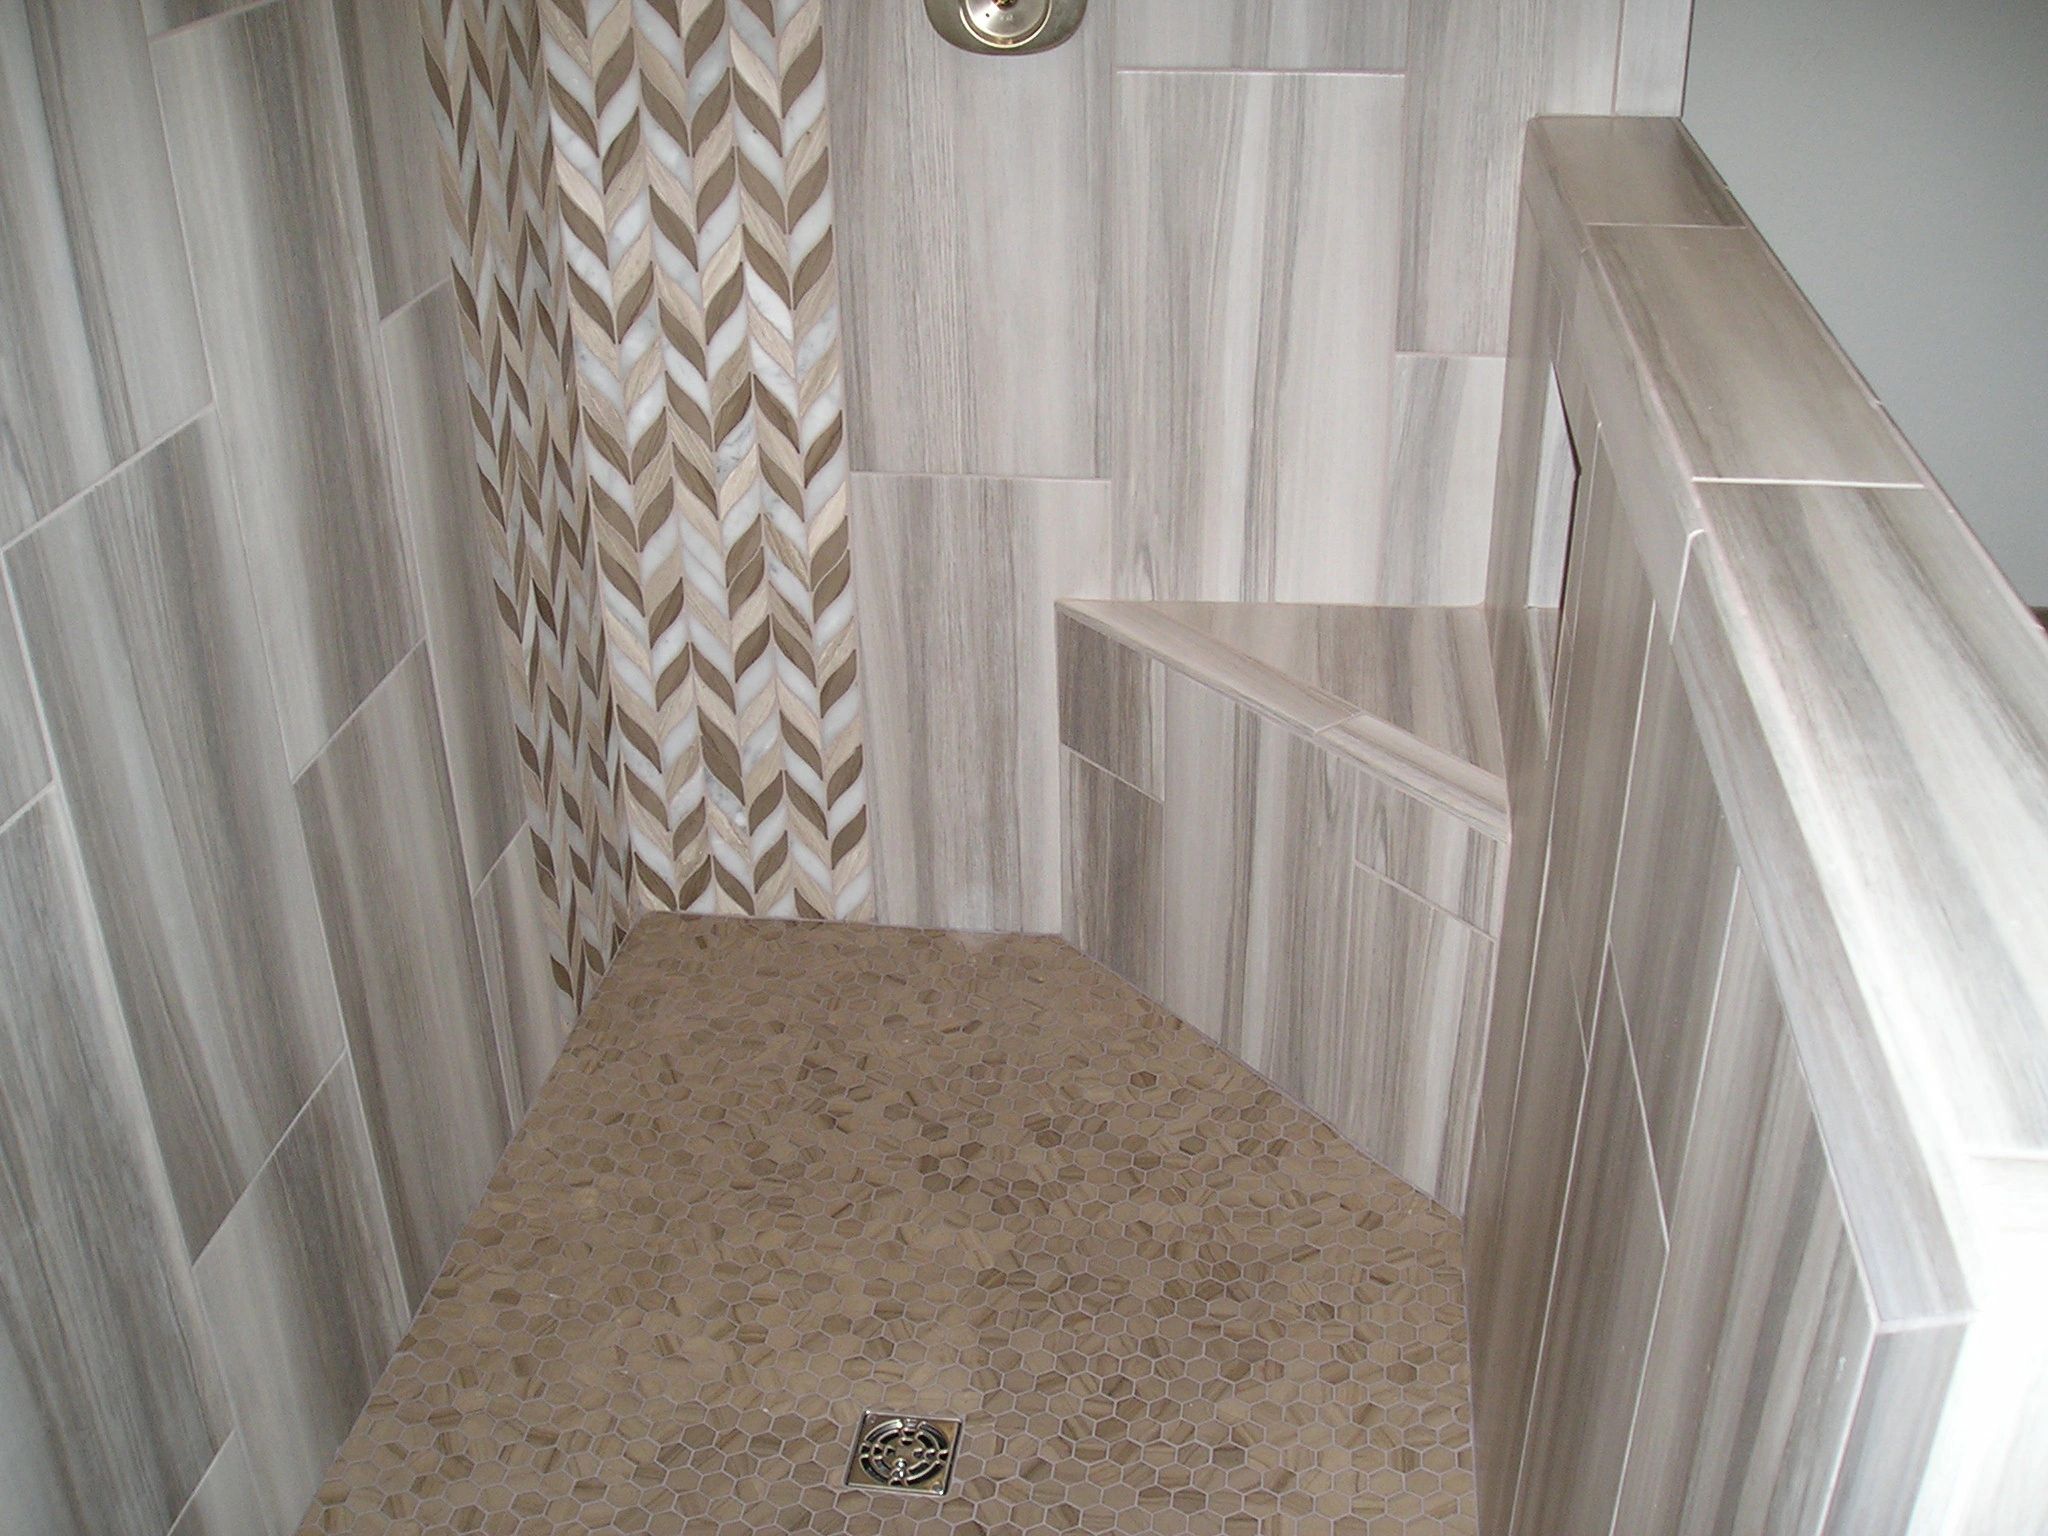 Walk in showers and floors with heated tile and seats offer quite the therapeutic experience.